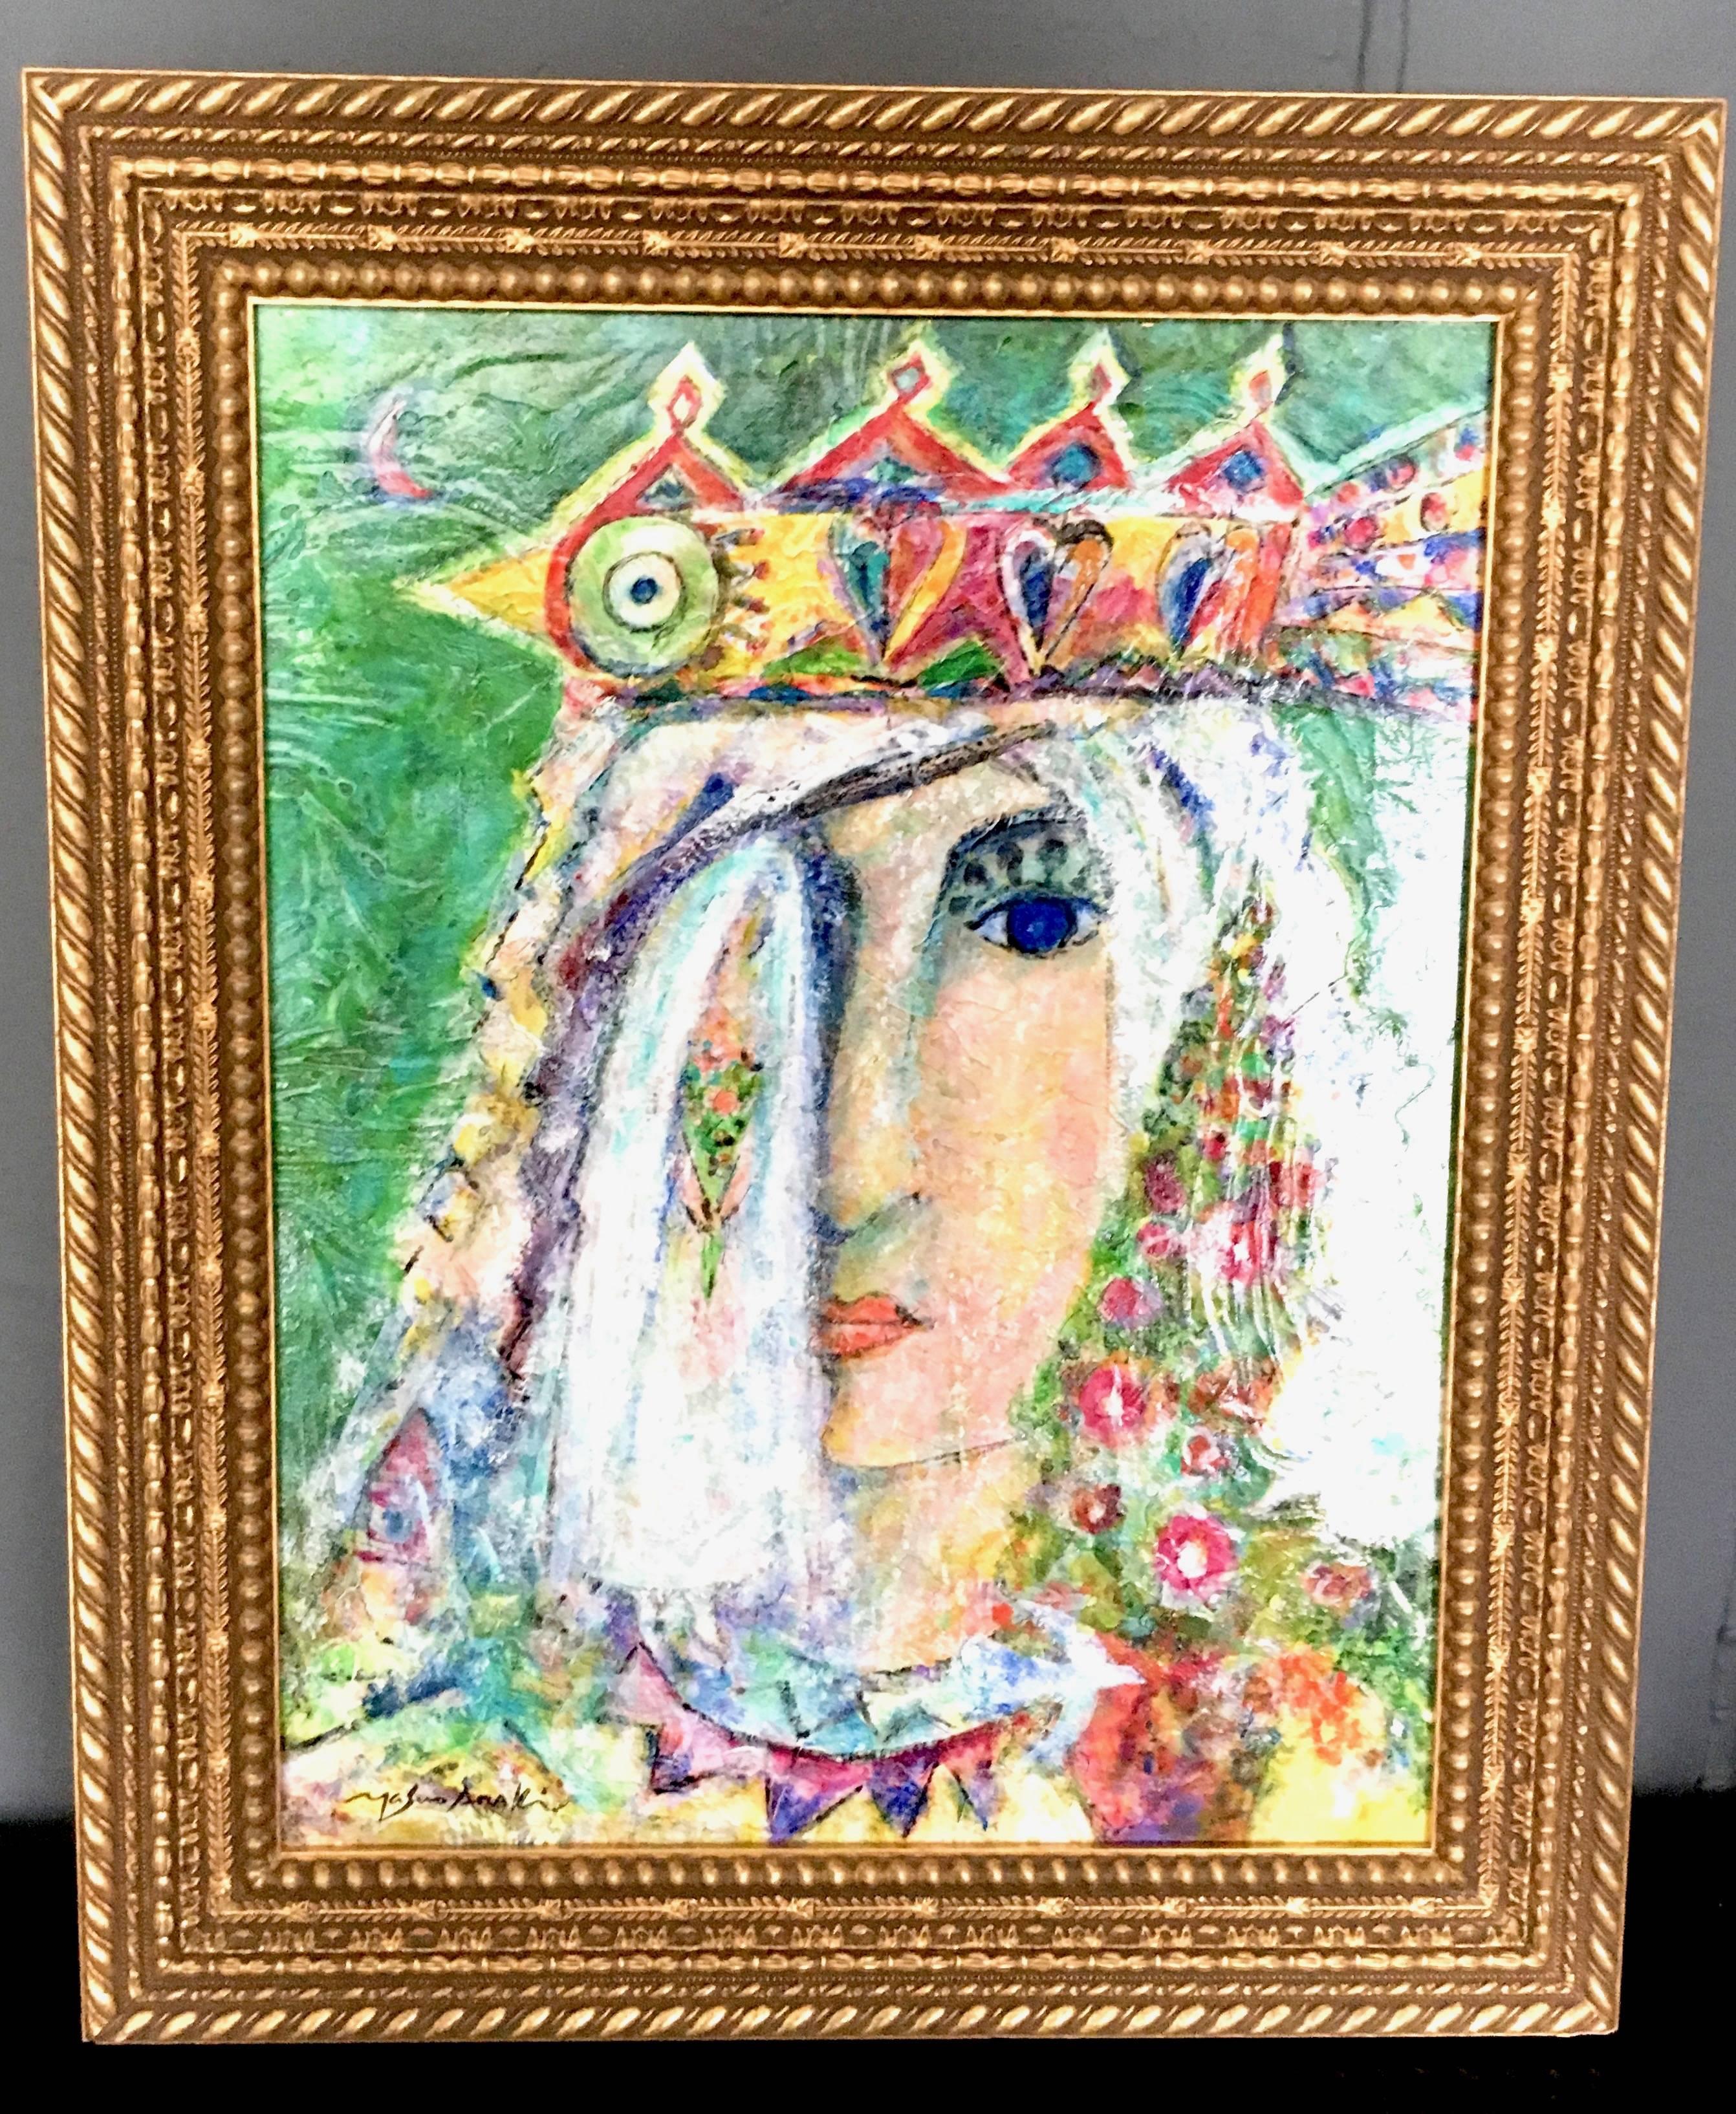 Painting of a Queen in brilliant jewel tone colors - framed in an impressive gilt surround. Instantly brings vibrancy to any room in the home - wonderful in a home office, kitchen or children's room.